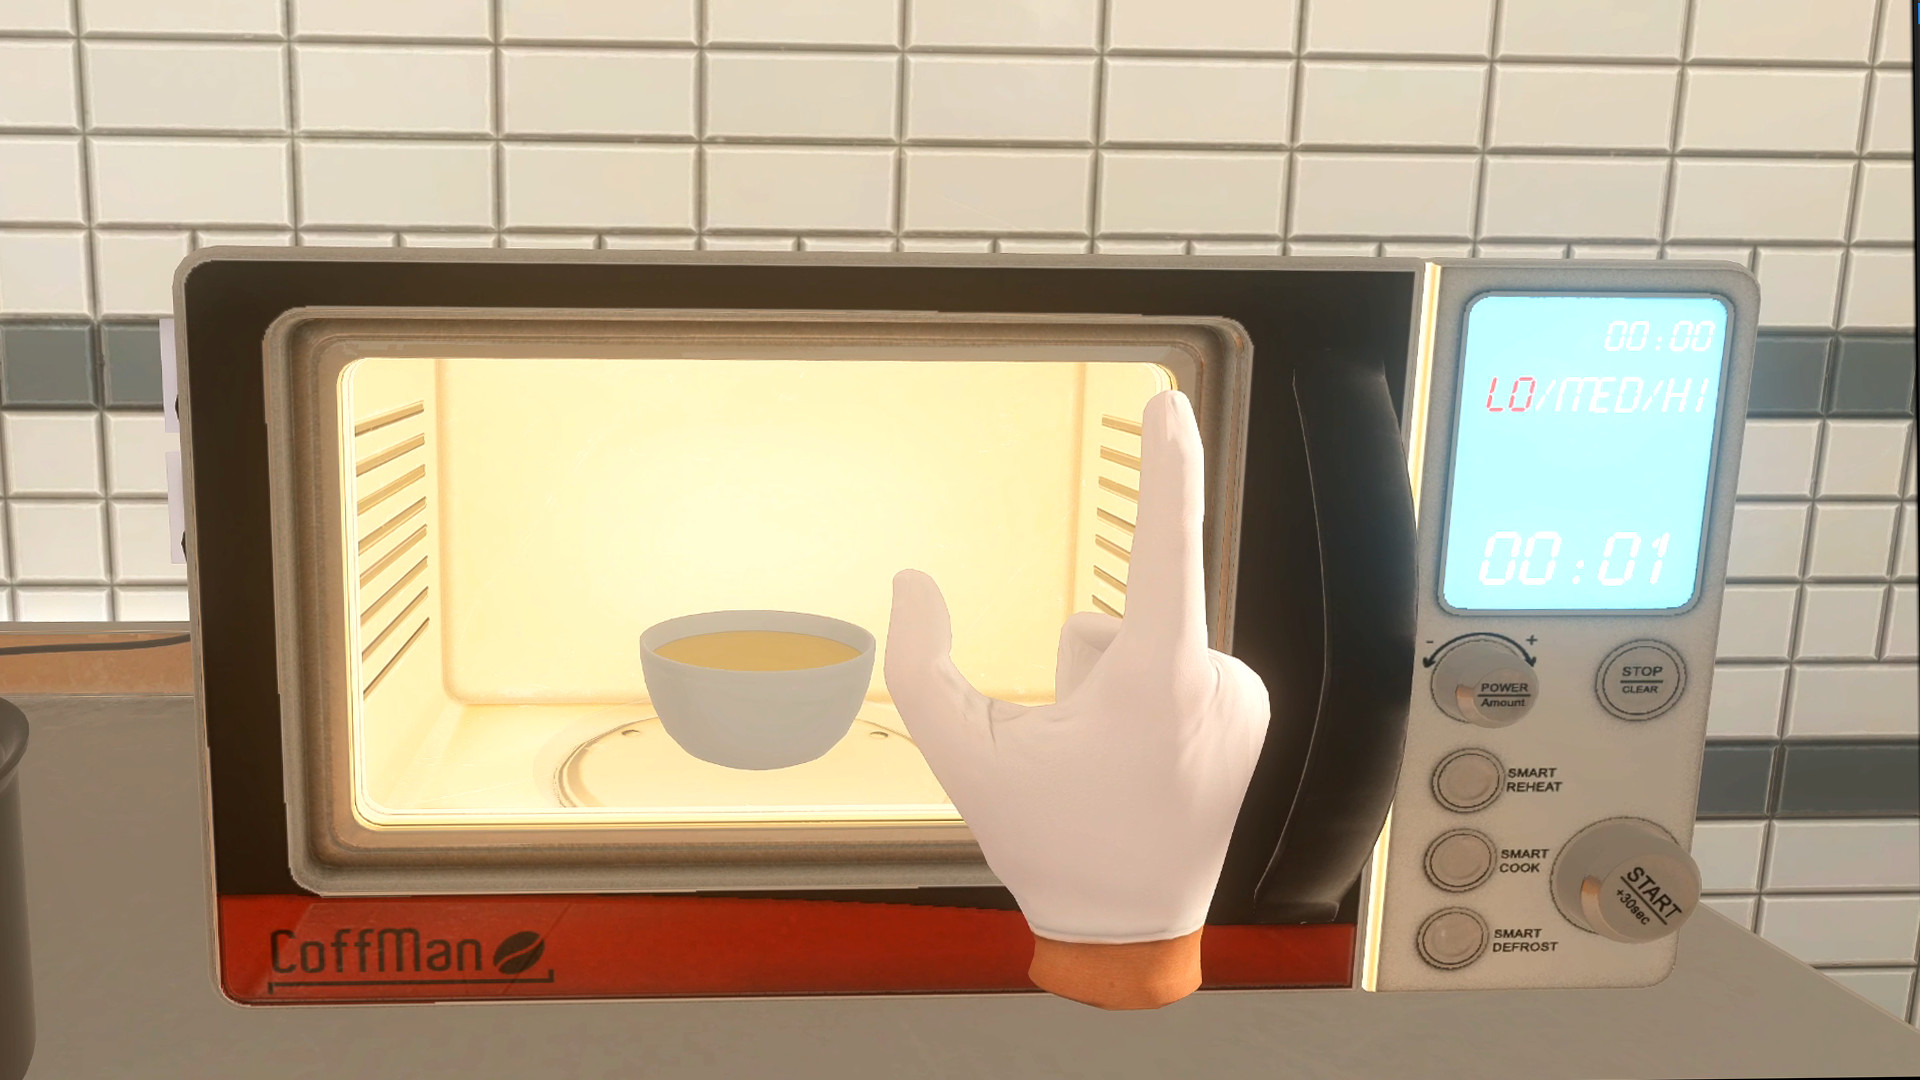 PlayWay - Cooking Simulator VR has been nominated for the VR Game